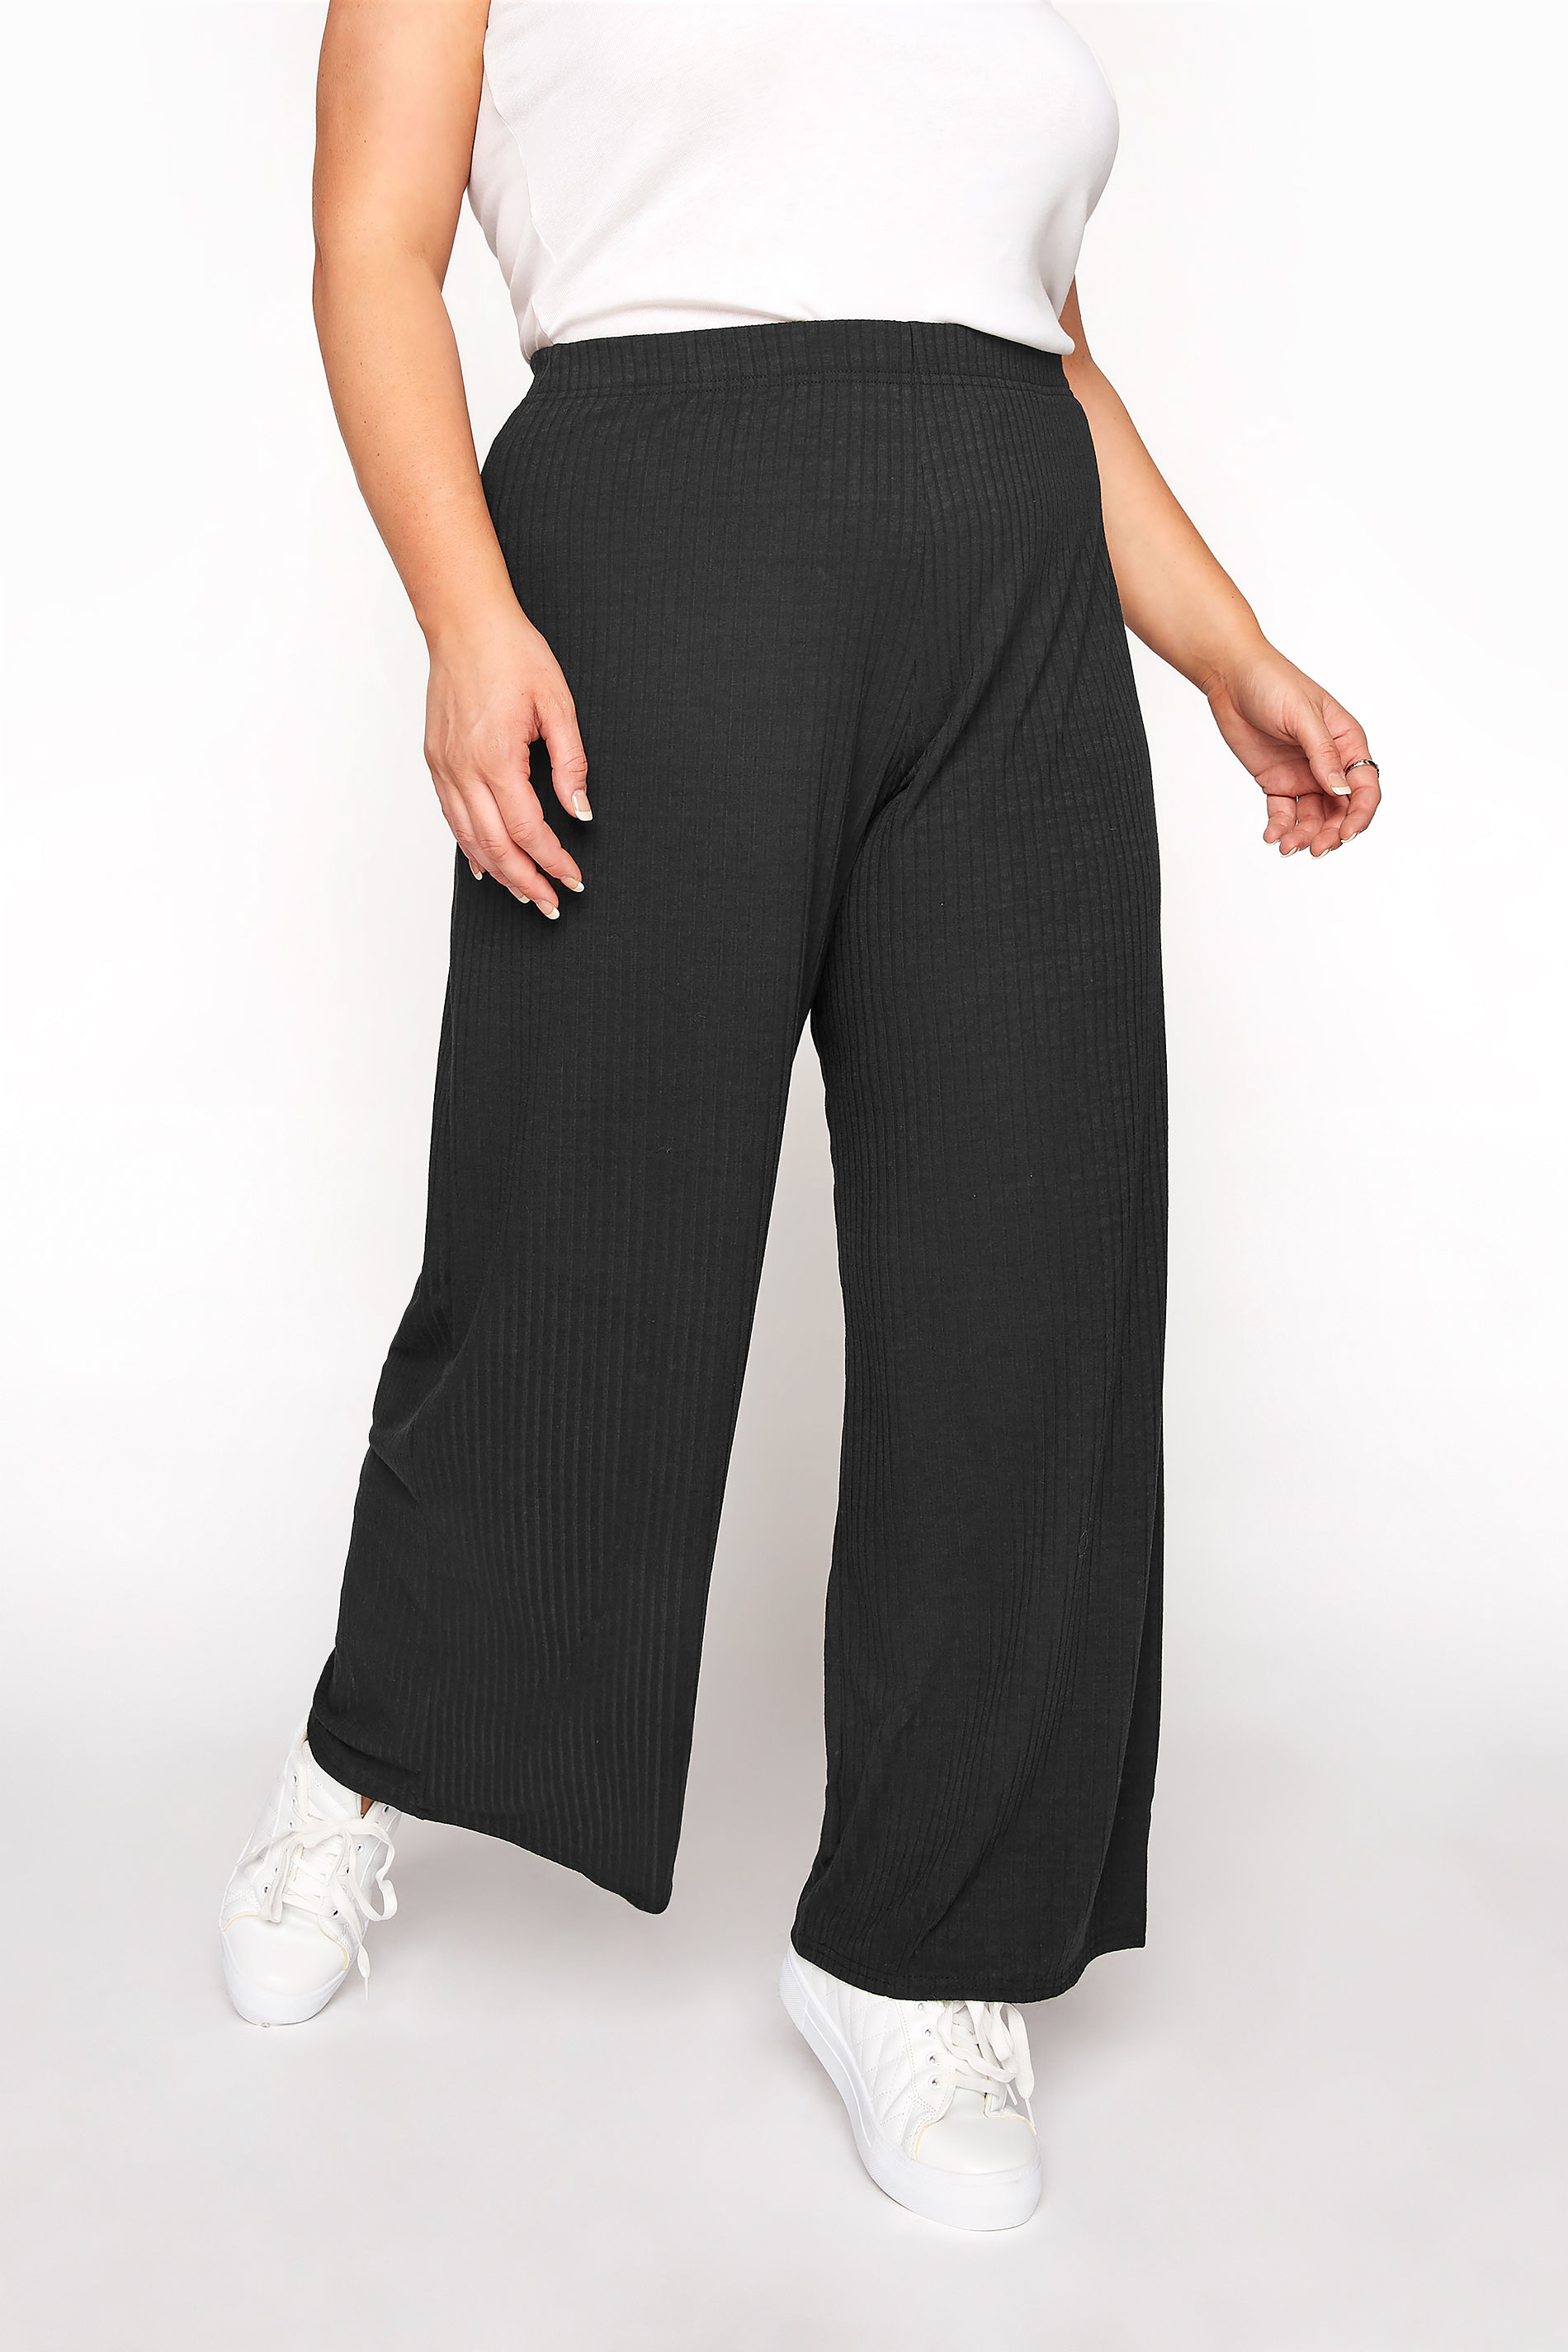 LIMITED COLLECTION Black Ribbed Wide Leg Trousers_B.jpg